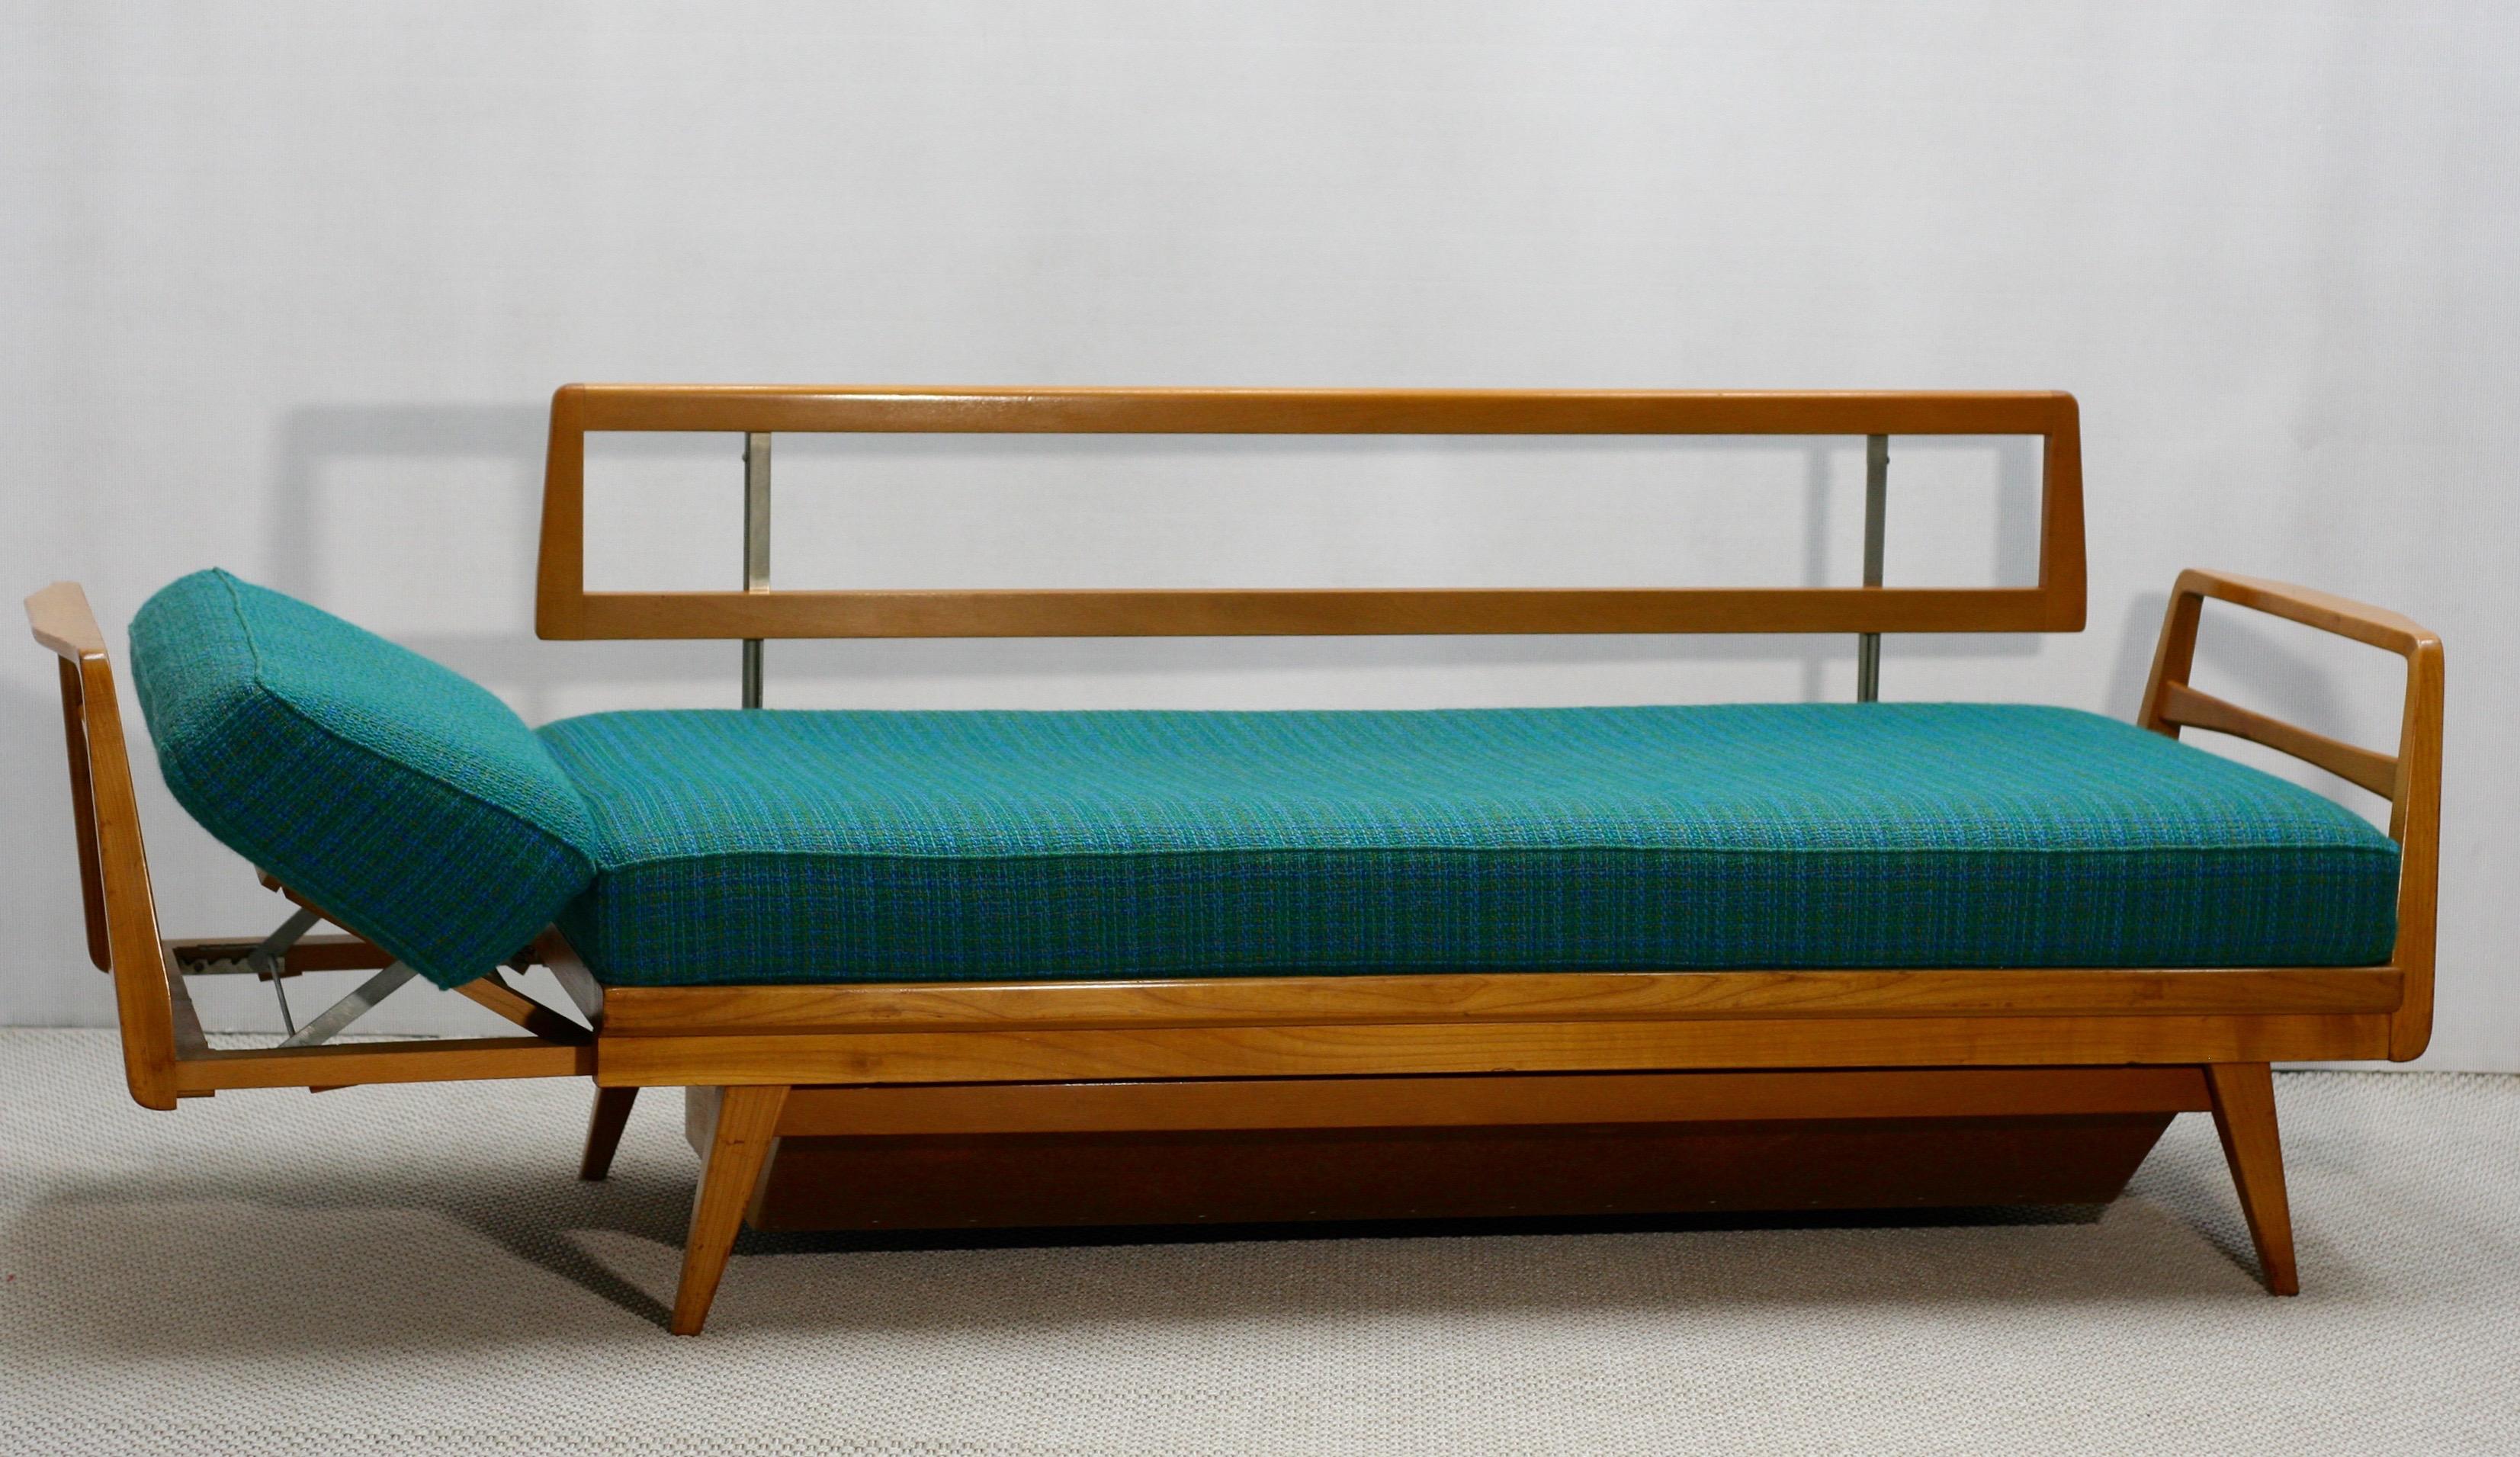 MidCentury German Extendable Beech Wood Daybed Sofa from Knoll Antimott, 1950s In Good Condition For Sale In Riga, Latvia